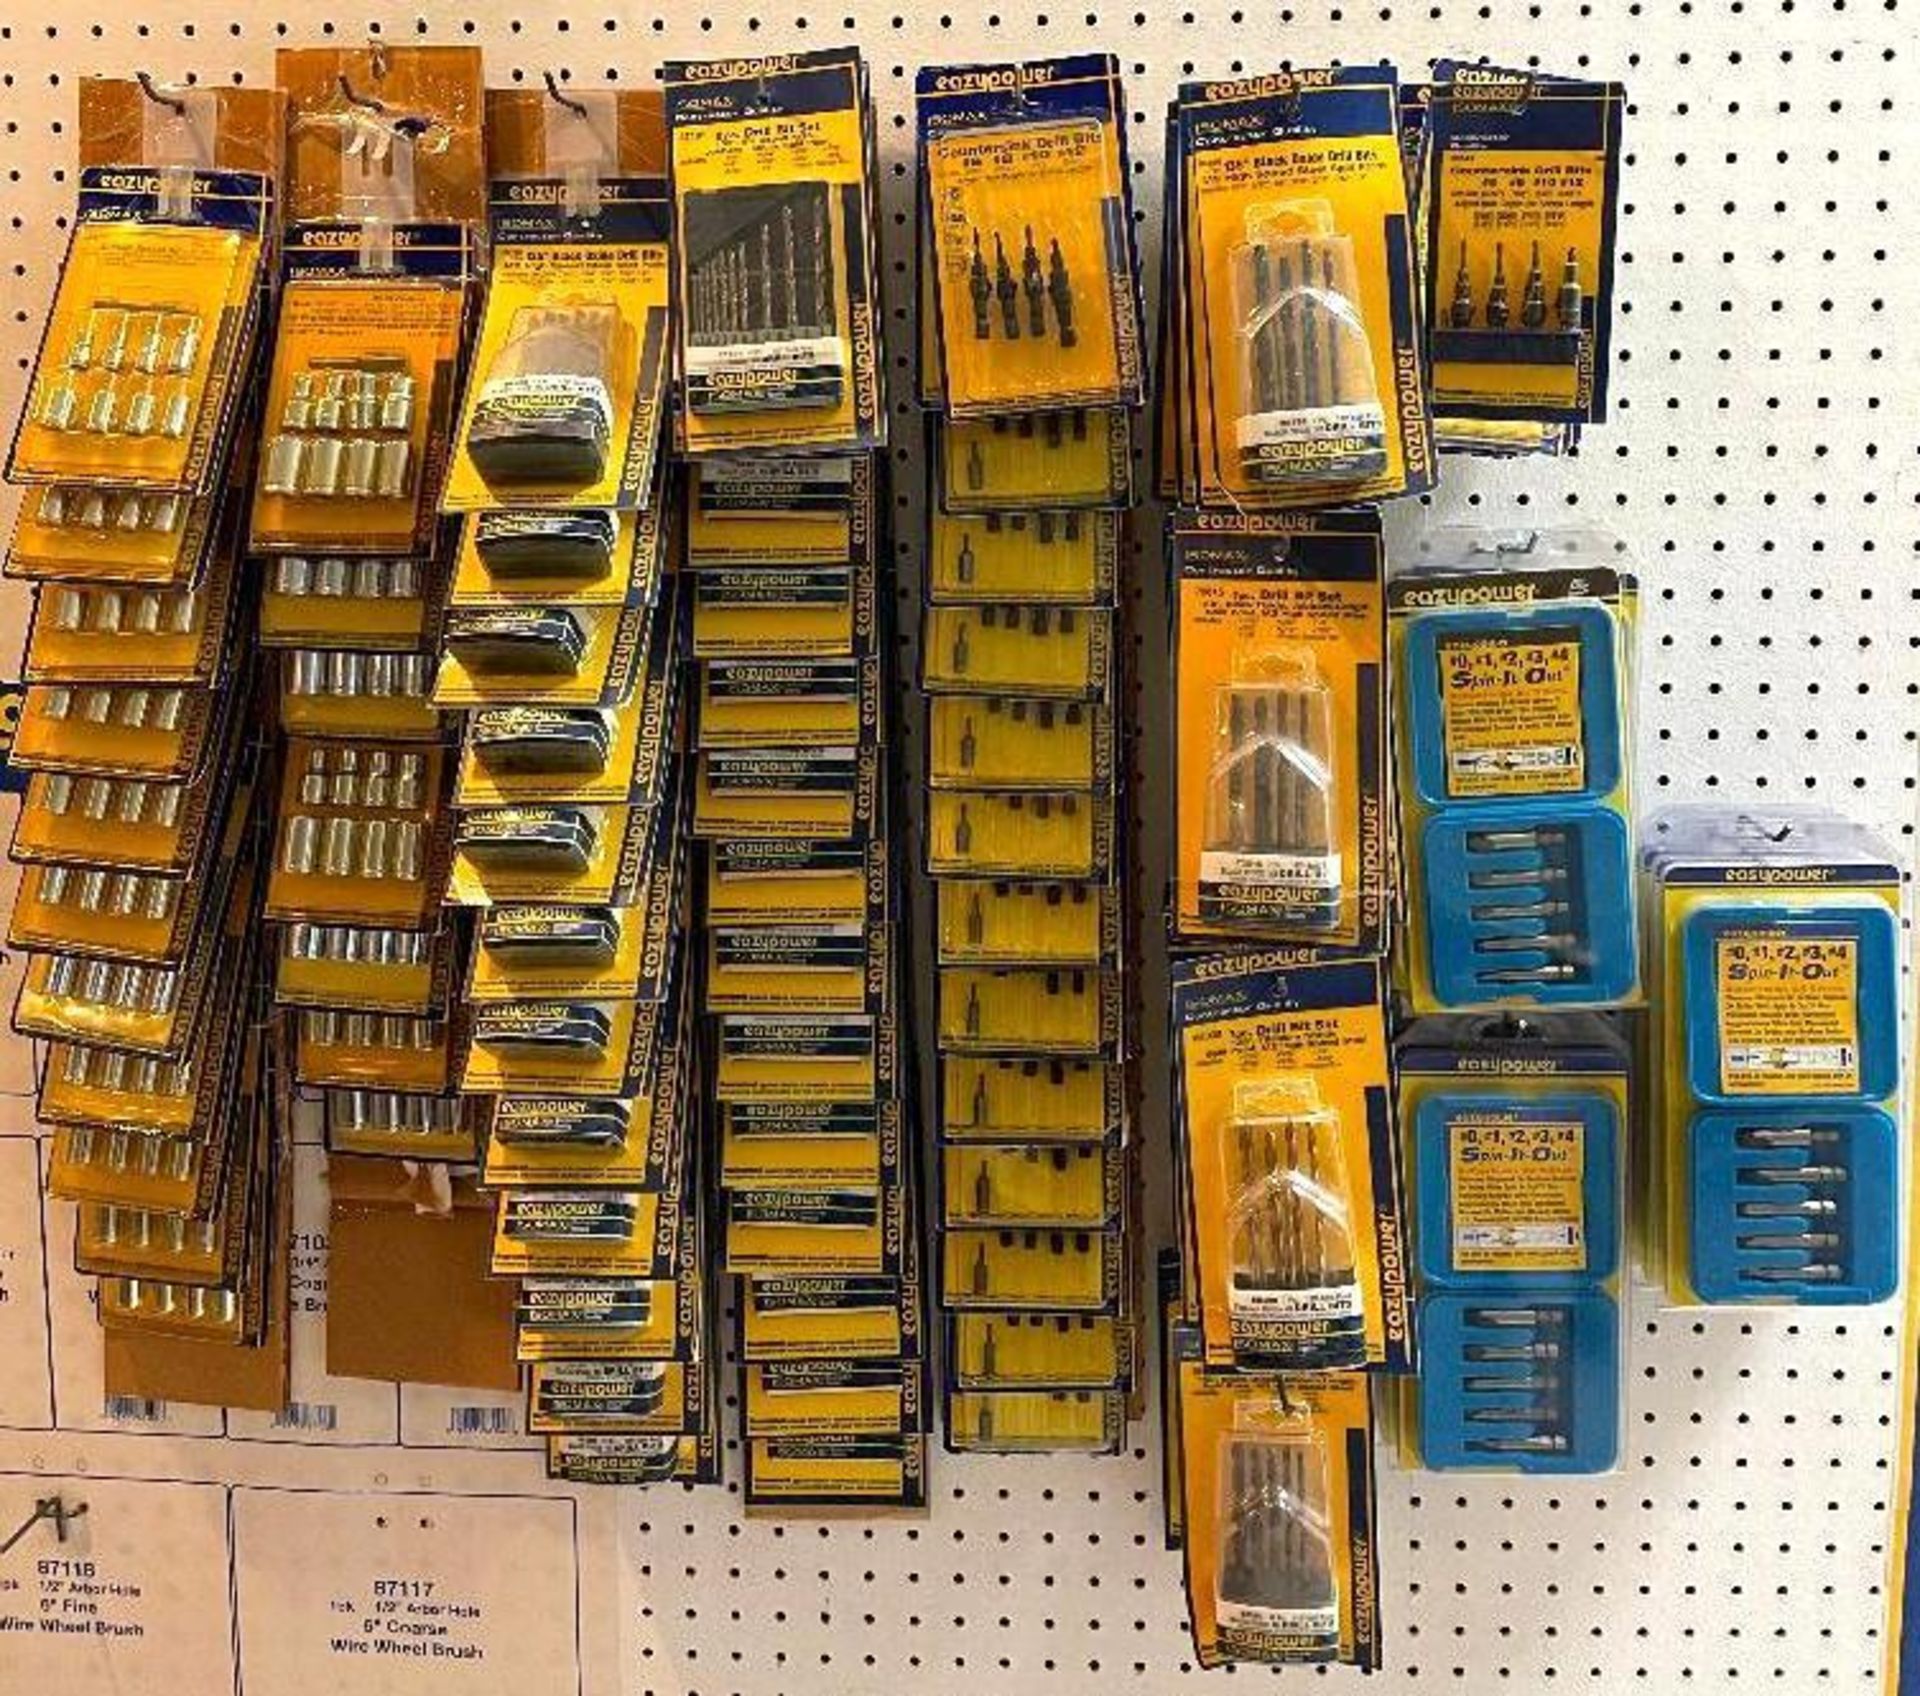 CONTENTS OF PEGBOARD AS SHOWN(ASSORTED DRILL BIT SETS) BRAND/MODEL EAZYPOWER LOCATION SHOWROOM THIS